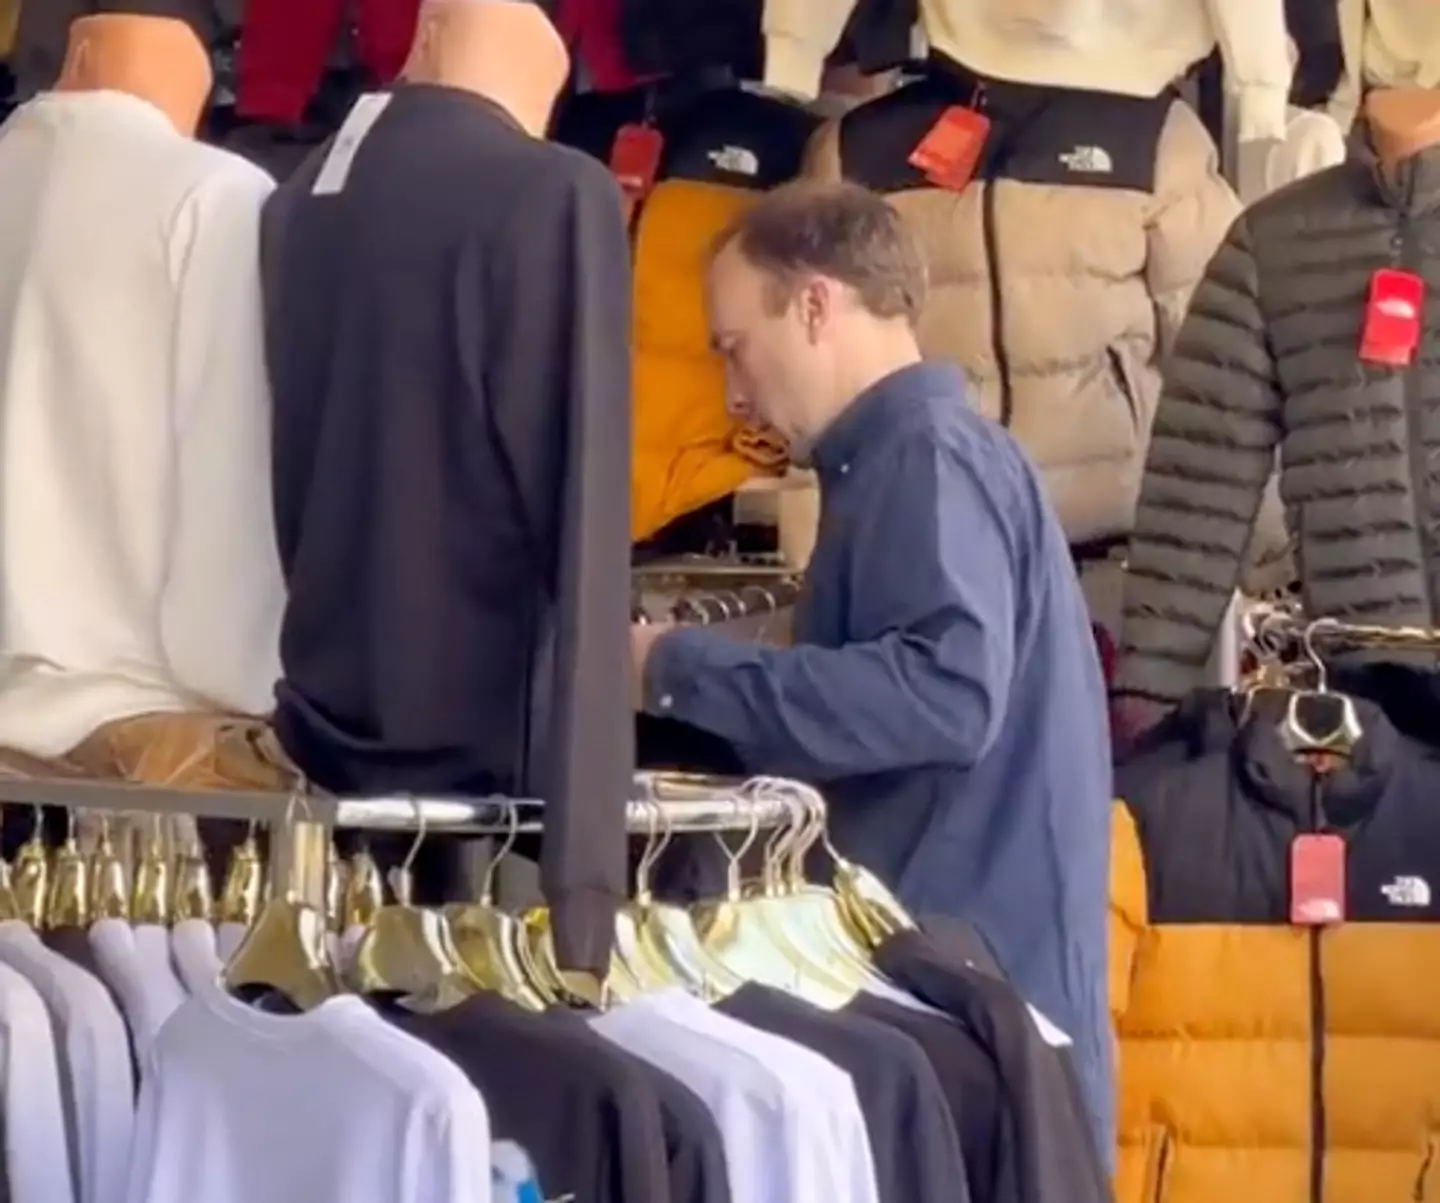 Hancock was spotted browsing some street clobber in Istanbul.